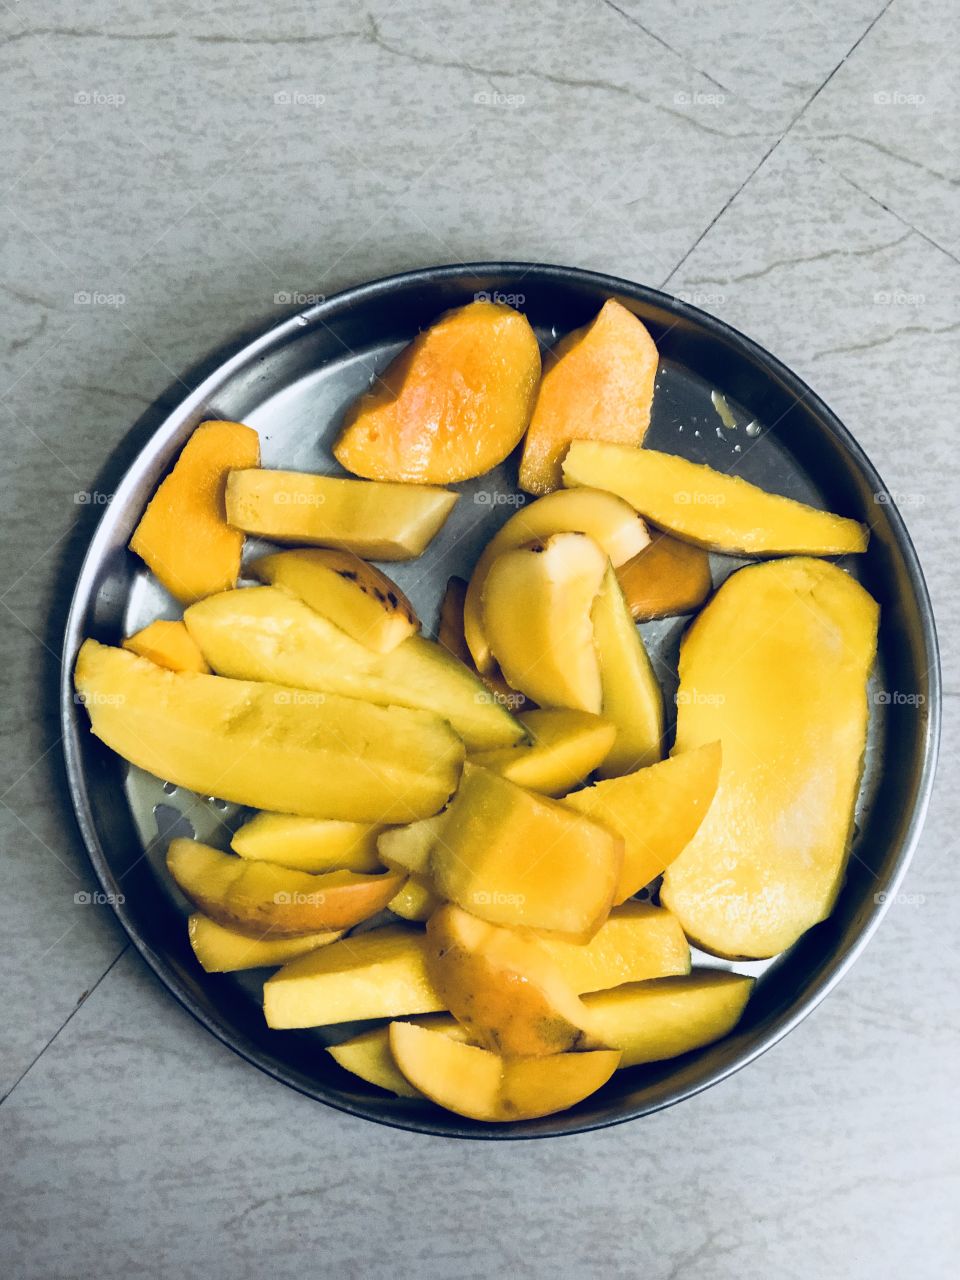 An Indian summer delicacy - mango 